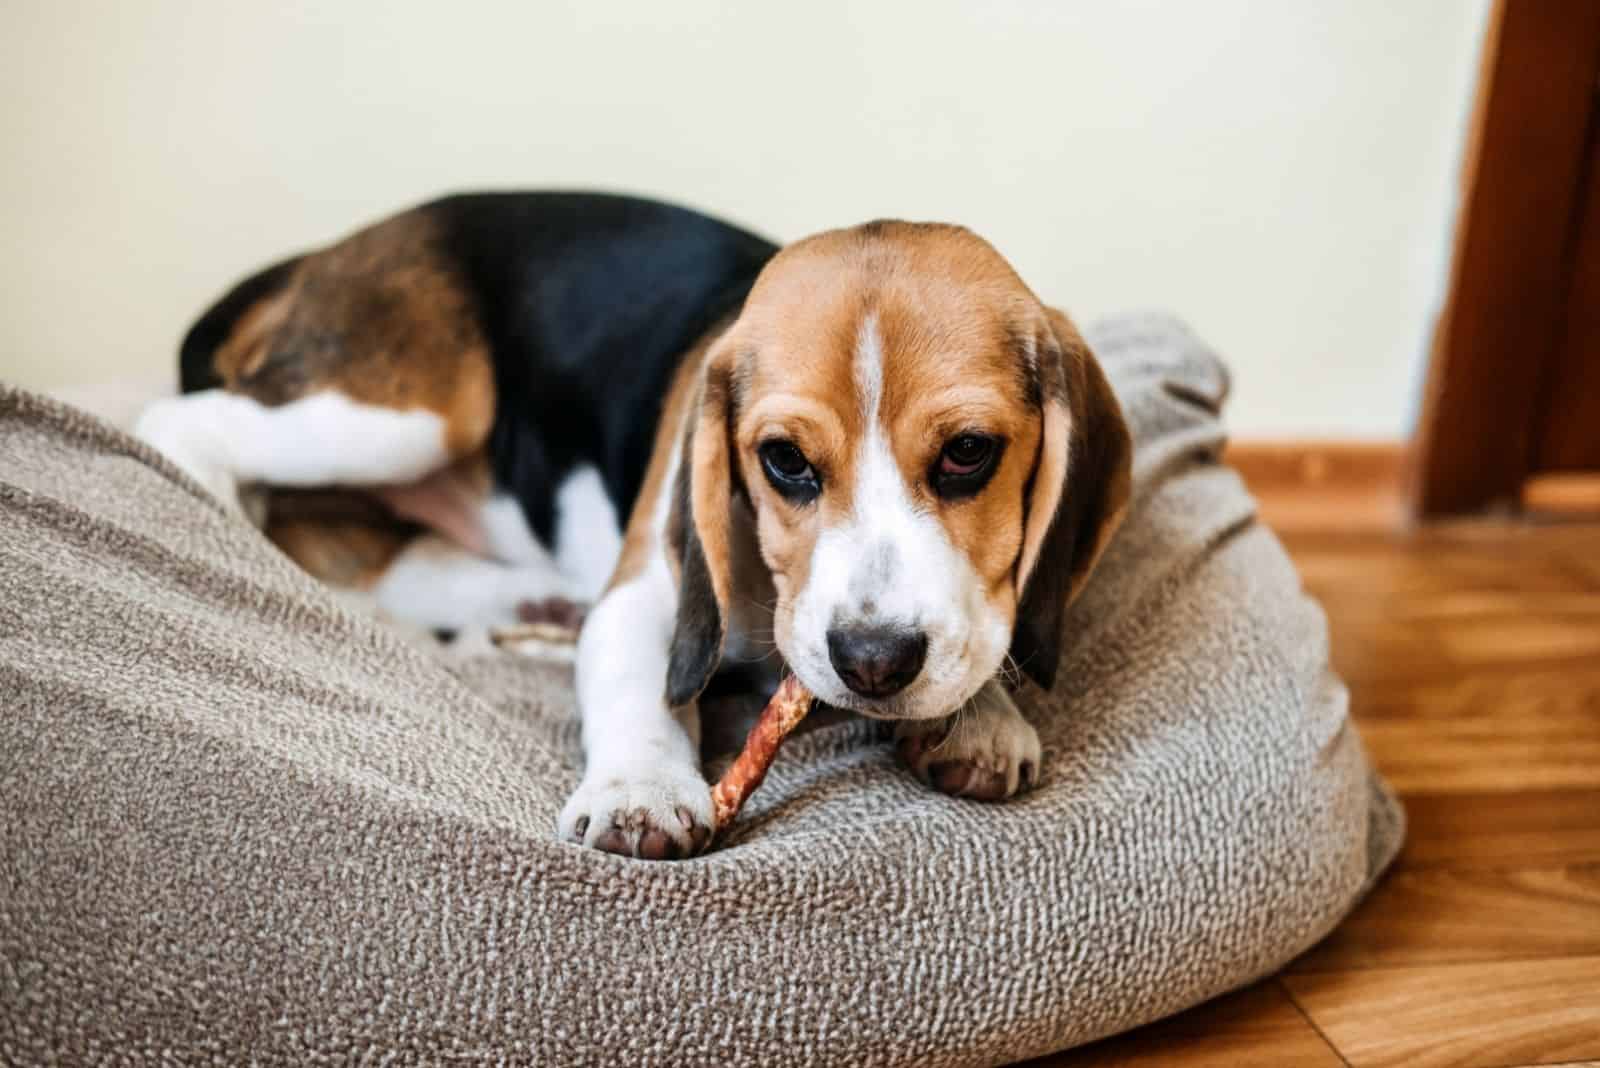 Beagle puppy eating Dog Snack Chewing Sticks at home